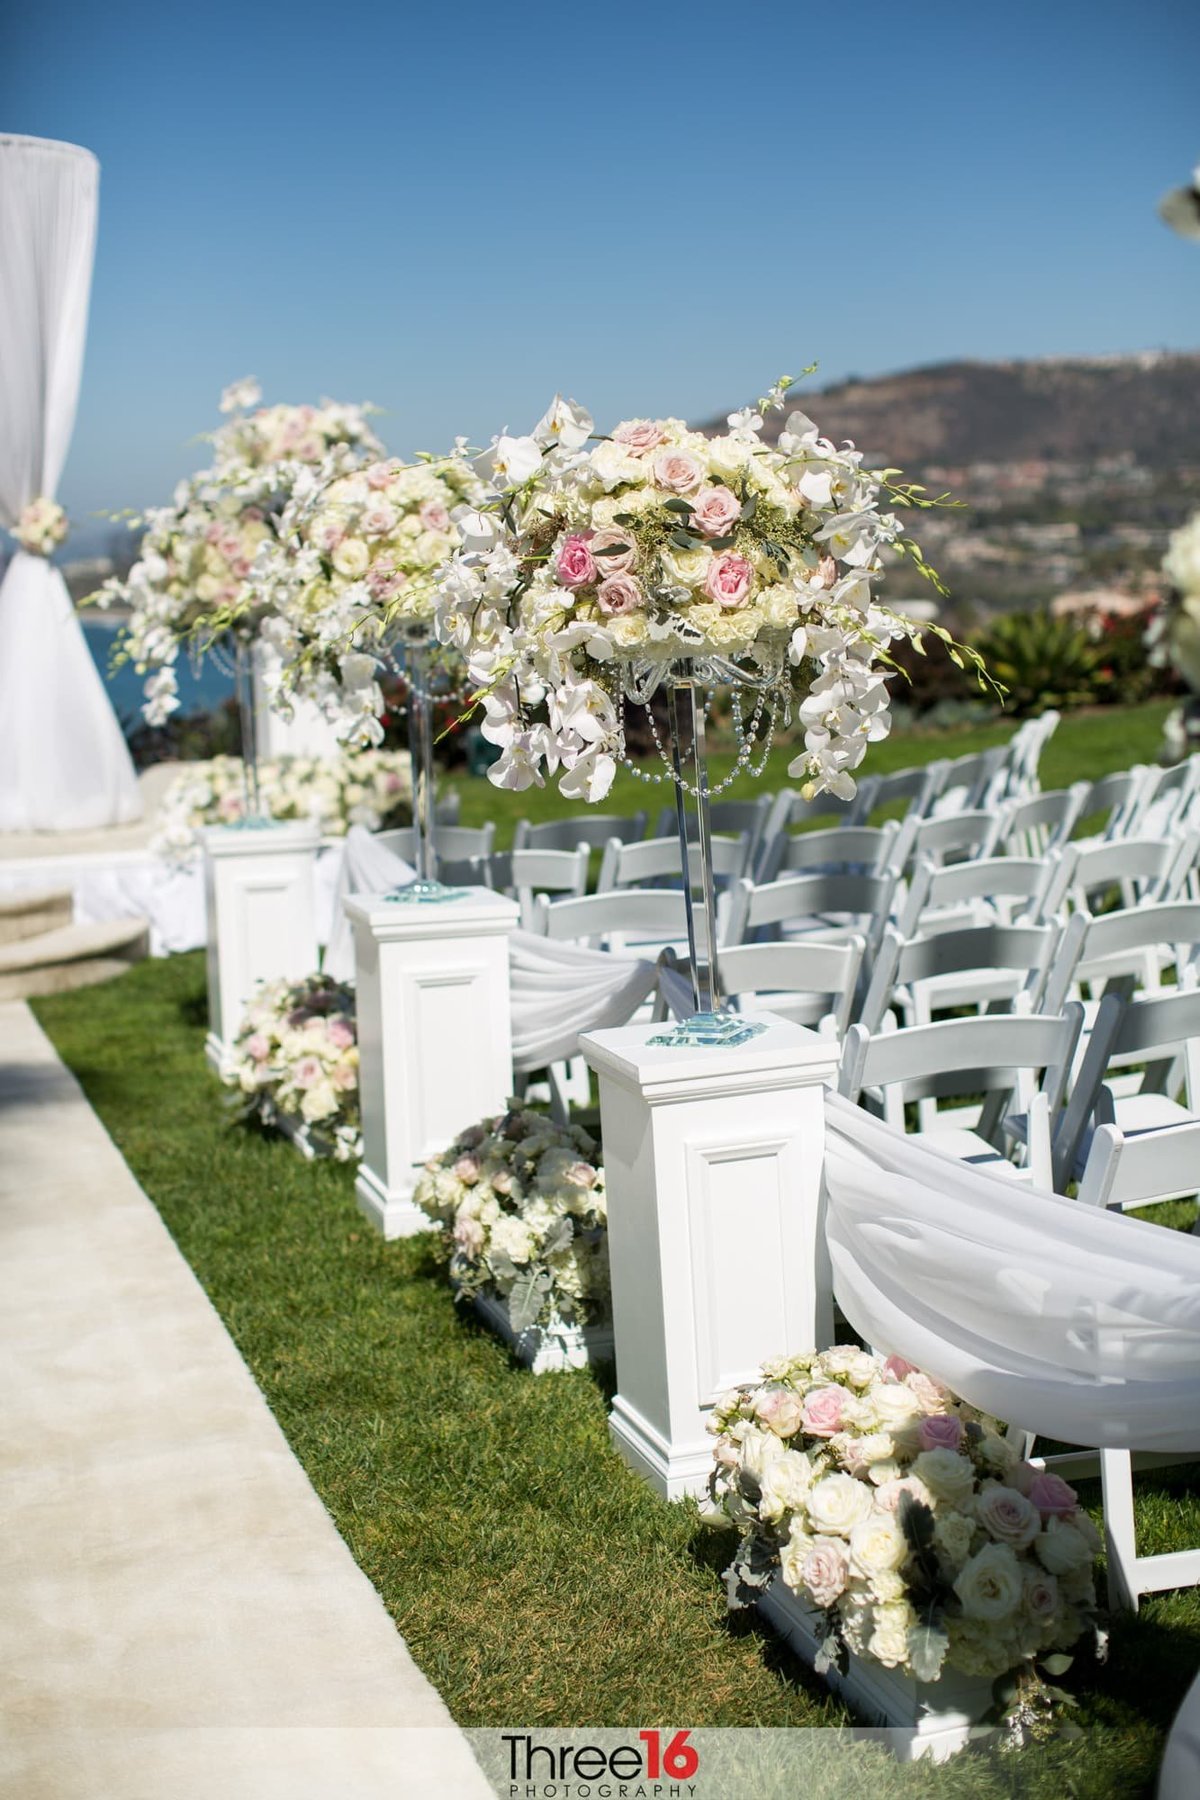 Floral arraignments amongst the wedding ceremony seating